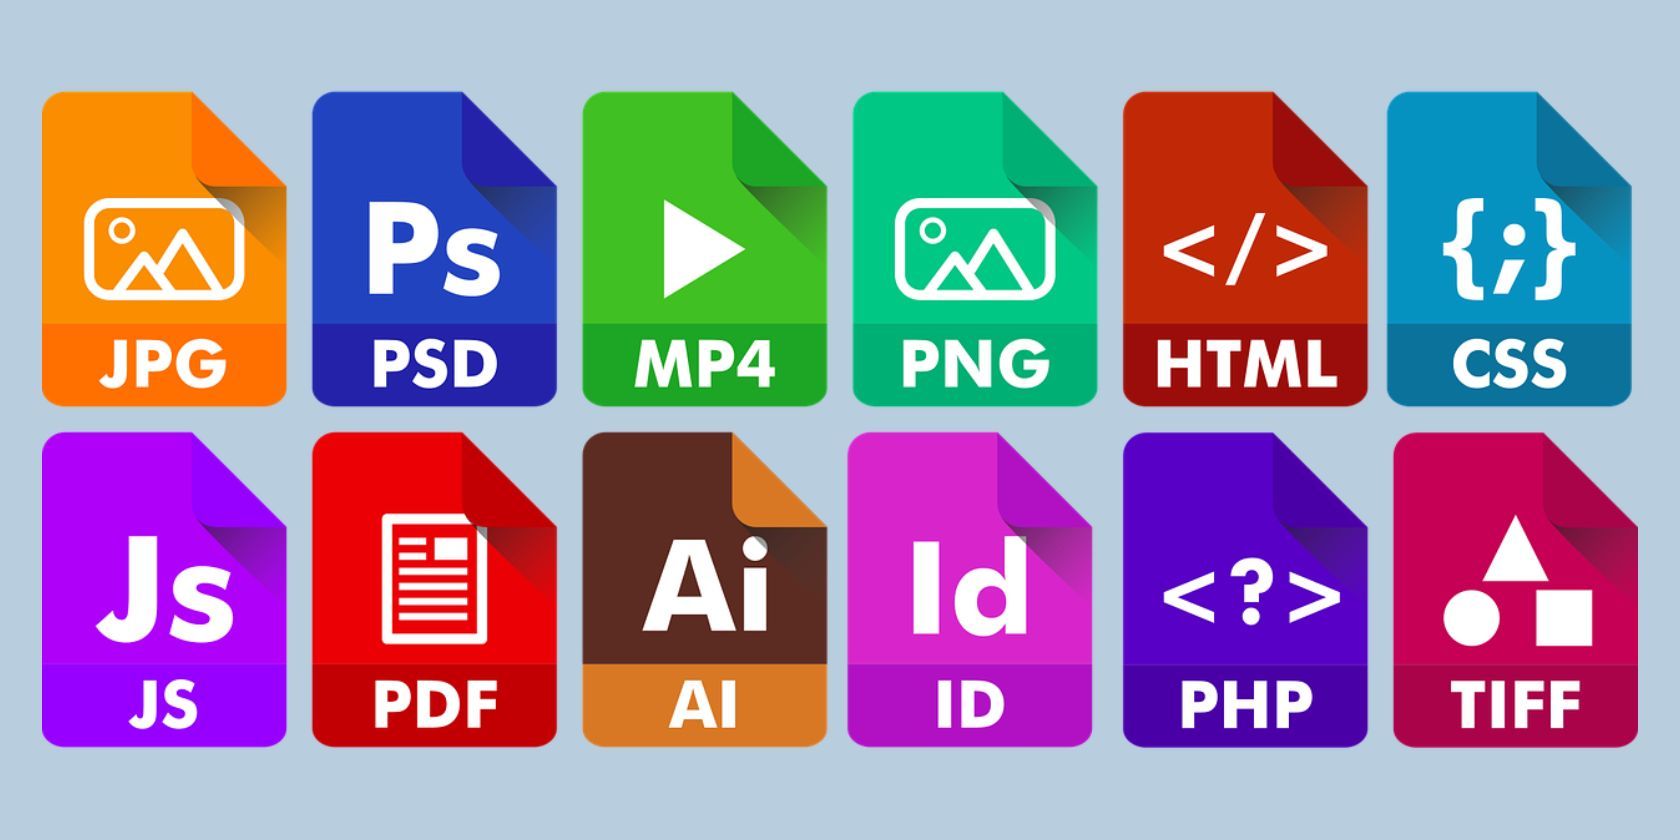 Different file types and their extensions